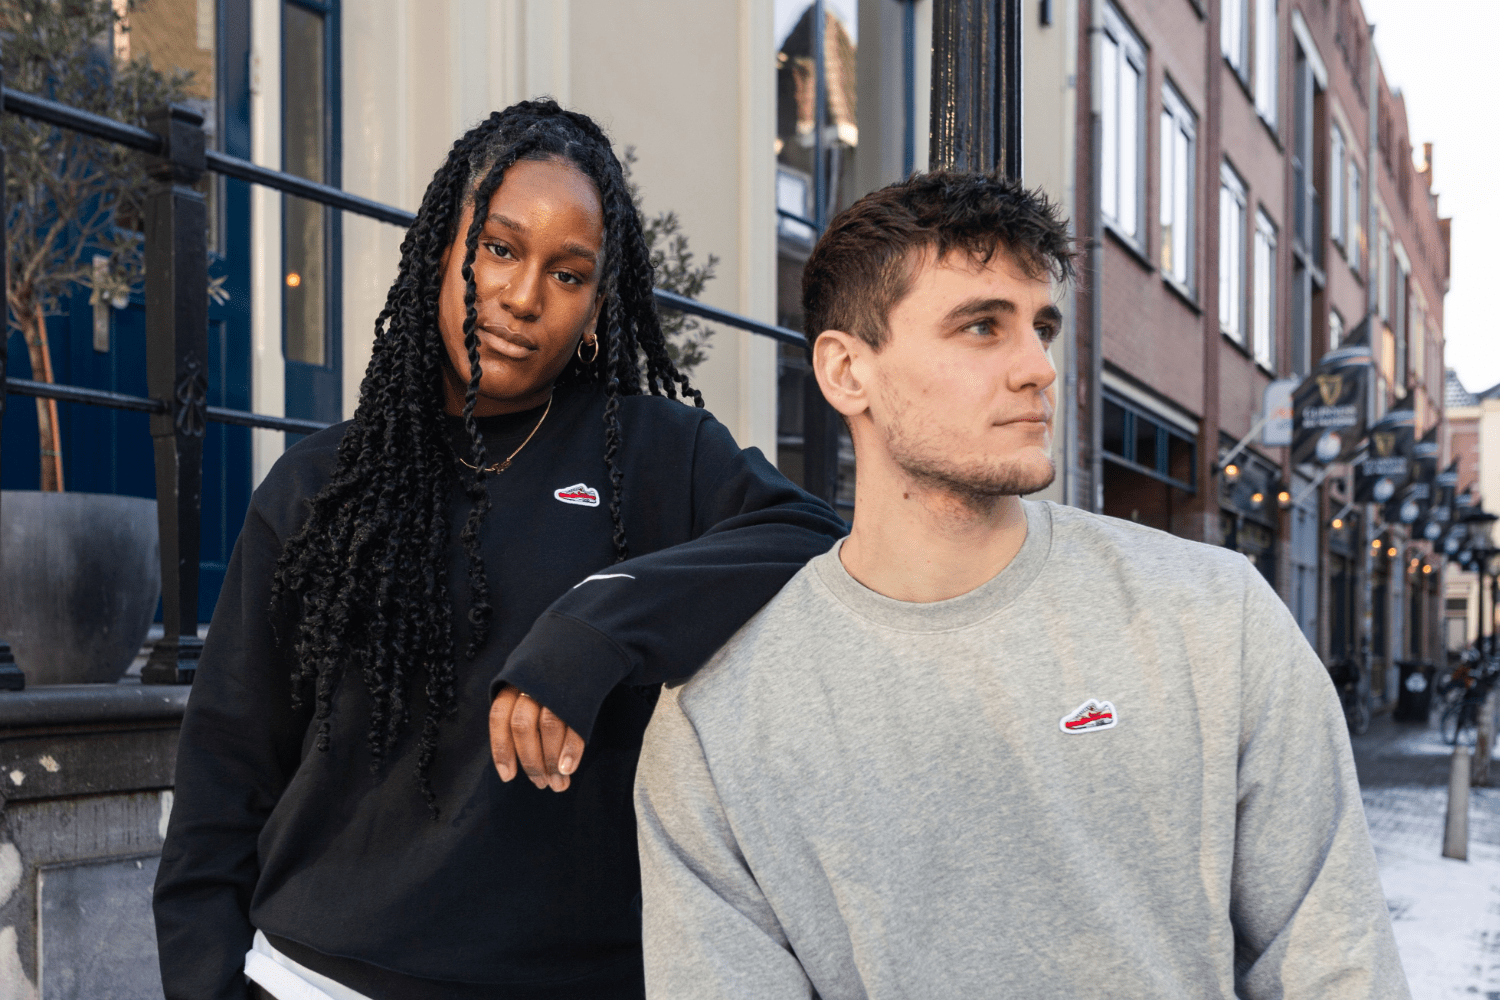 Shop the official Nike Air Max 1 clothing collection